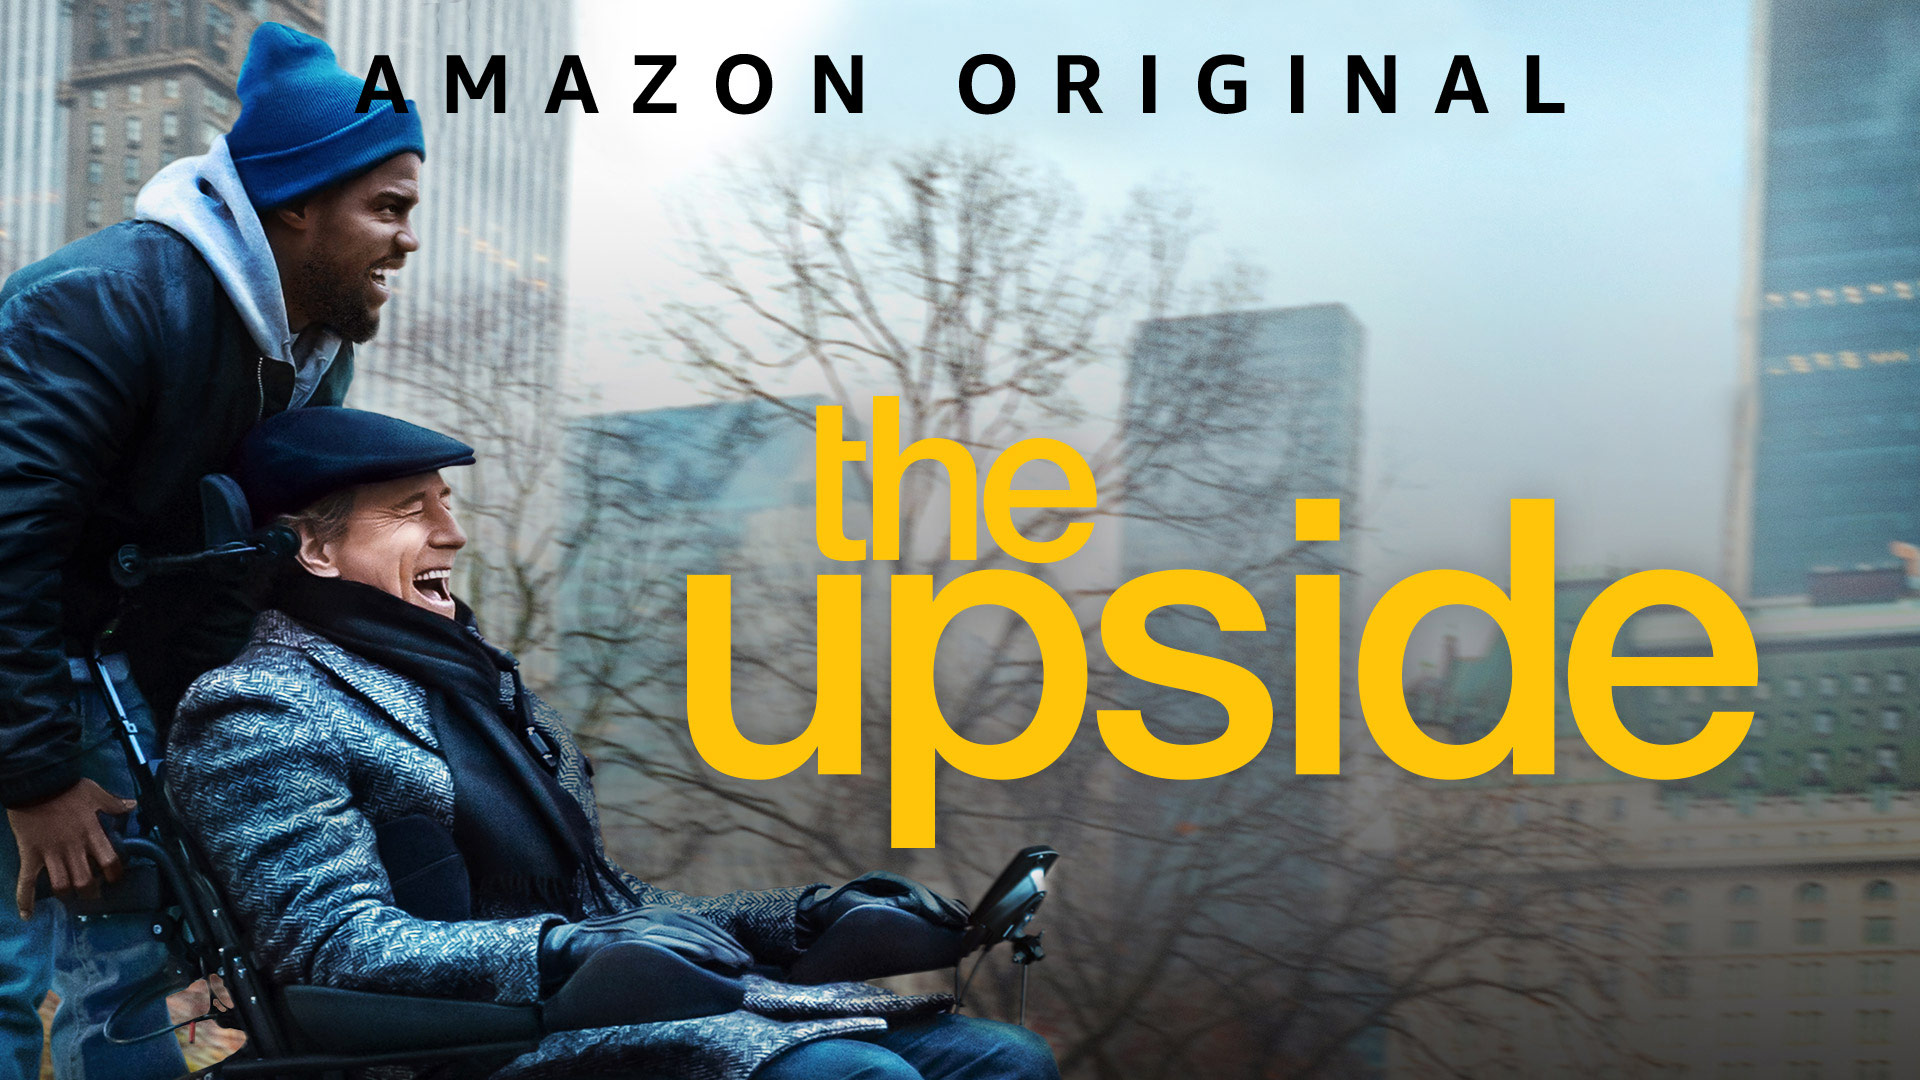 Reflecting On The Life Lessons Shown In “The Upside” post thumbnail image